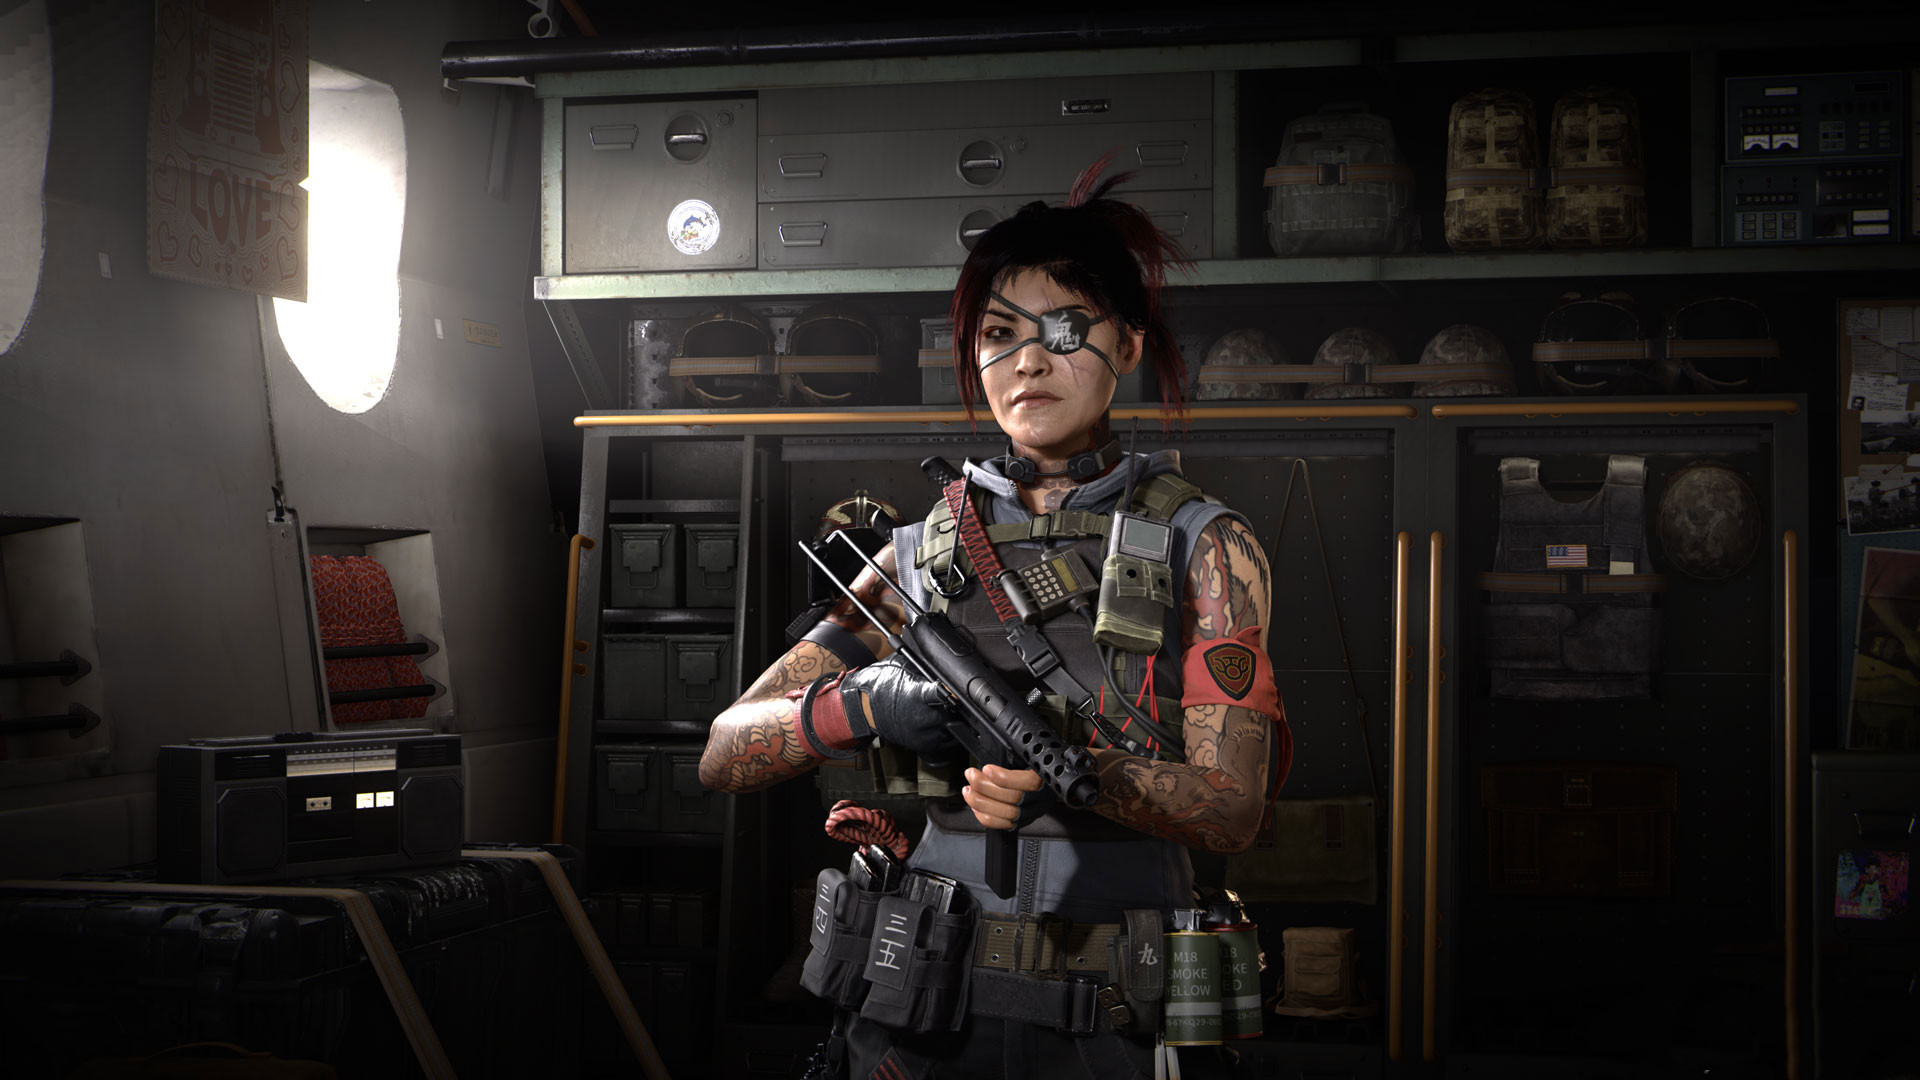 Warzone TEC-9 loadout: Kitsune, a Warzone operator, stands in a arsenal holding a TEC-9.